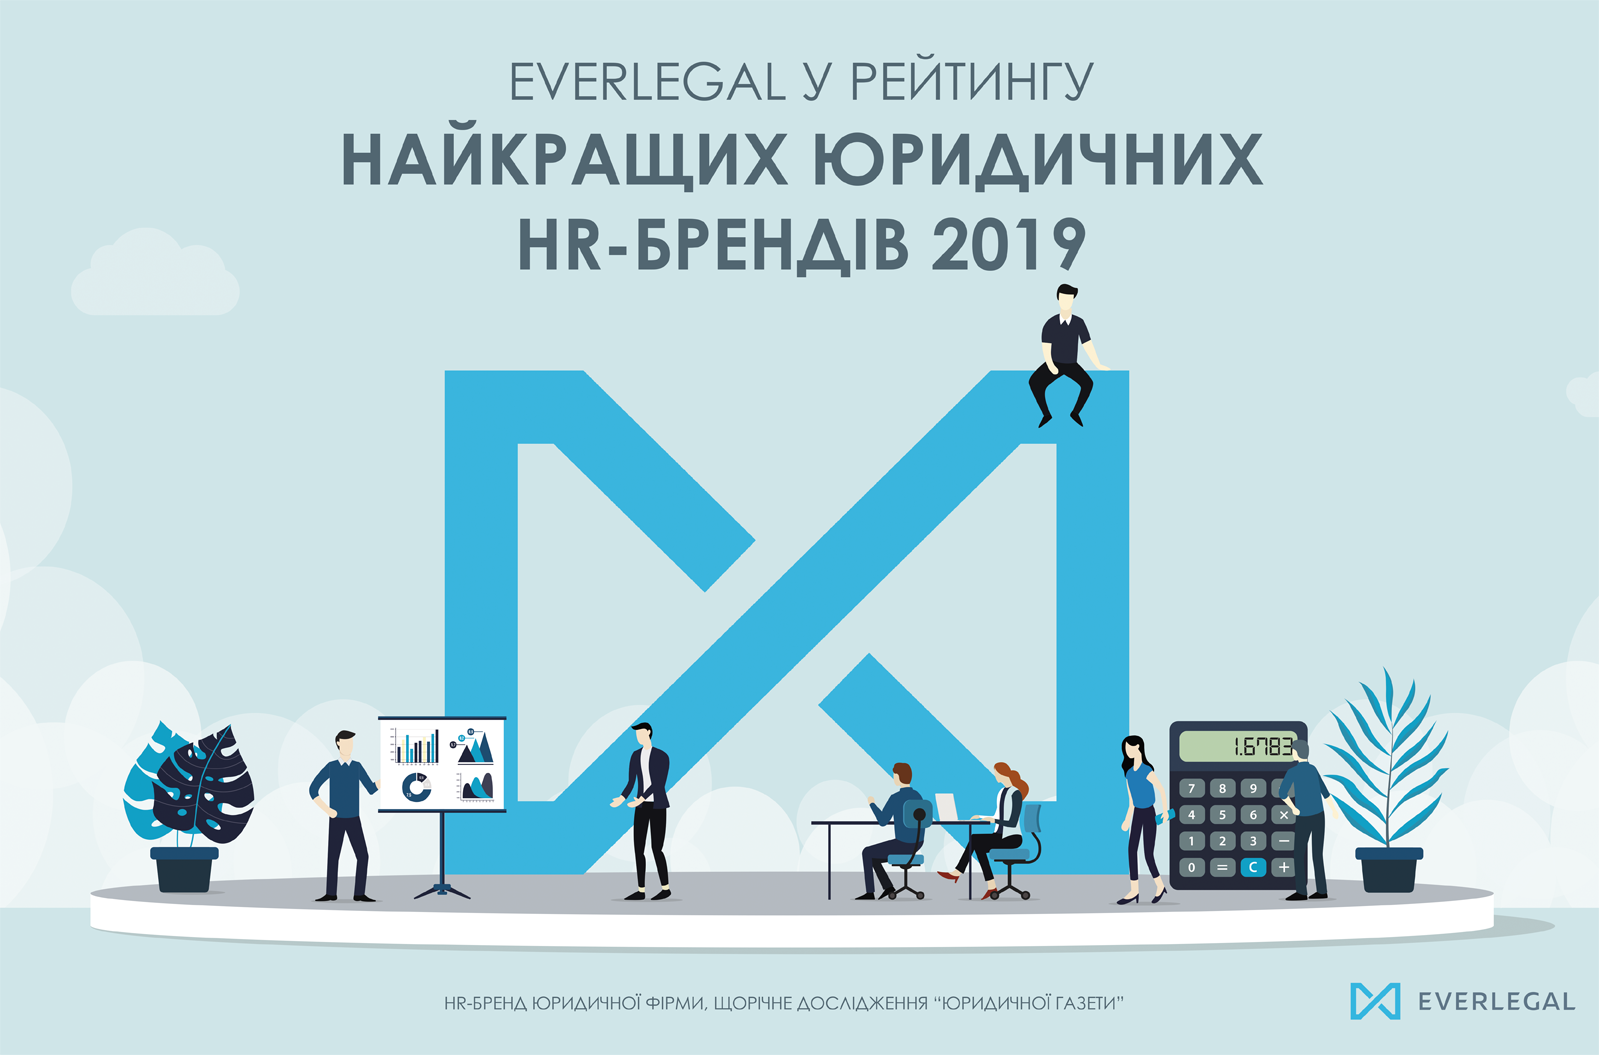 EVERLEGAL - in the ranking of the most attractive Law Firm 's HR-brand 2019